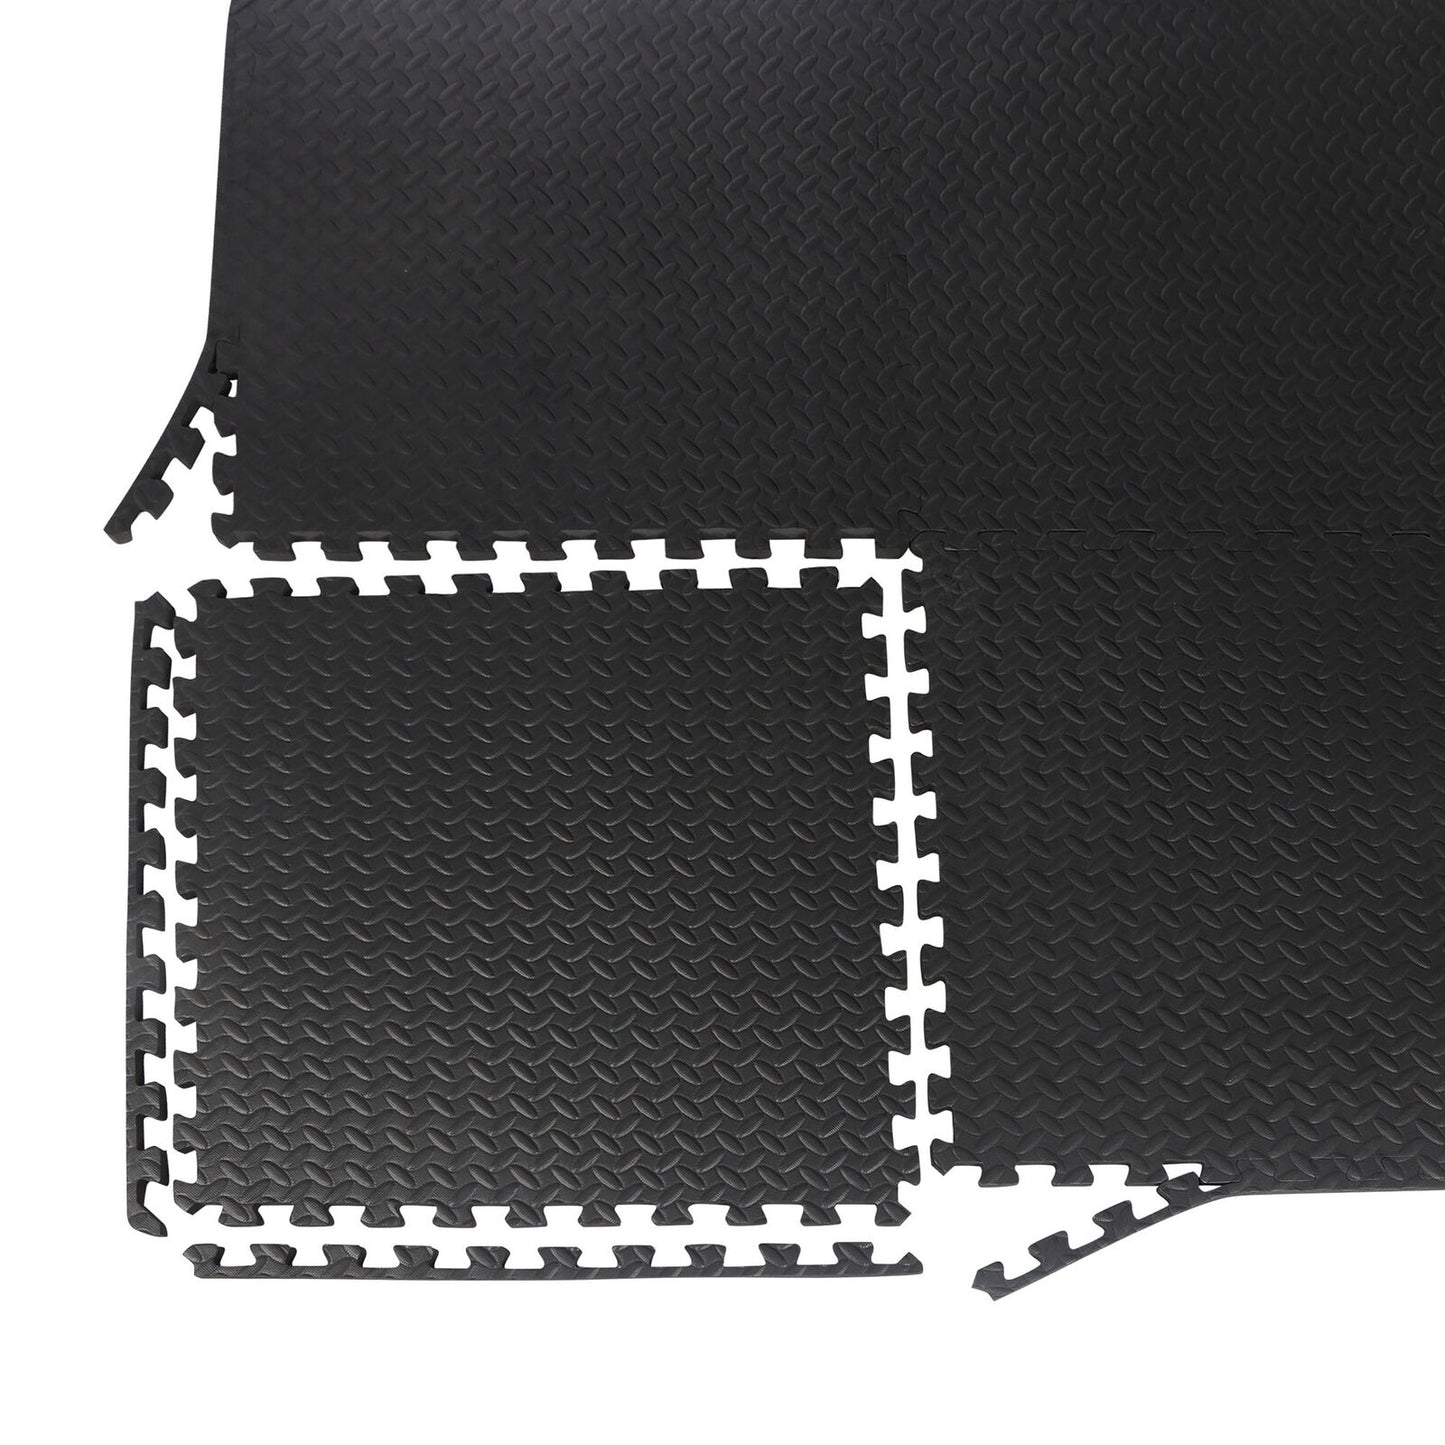 Puzzle Exercise Mat with EVA Foam Interlocking Tiles for Exercise Gym Workout